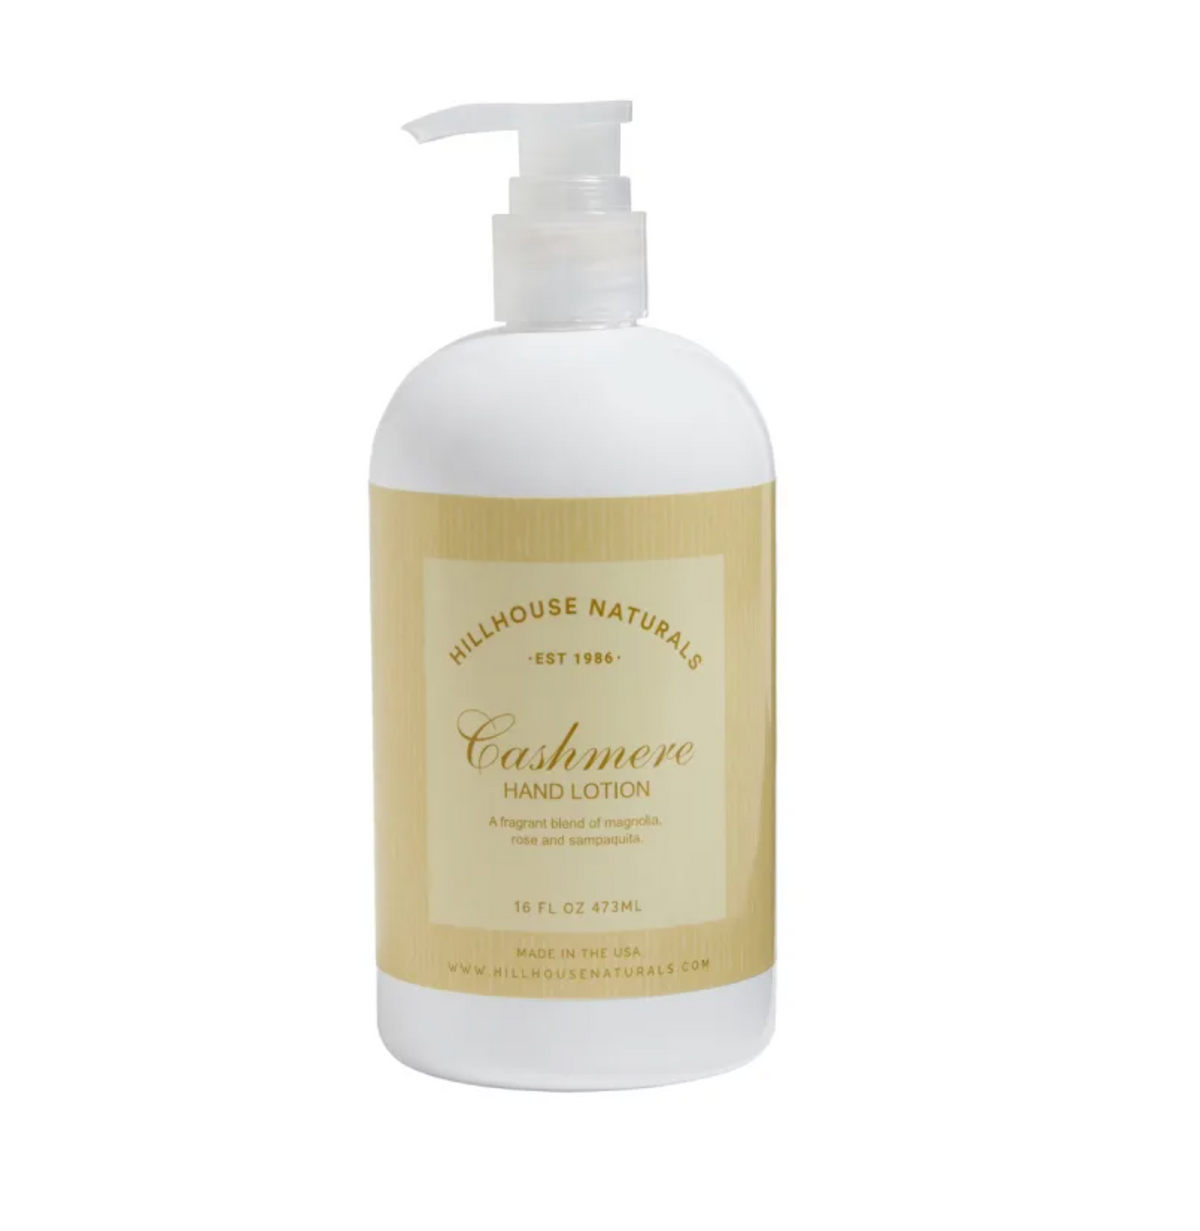 Cashmere Hand Lotion